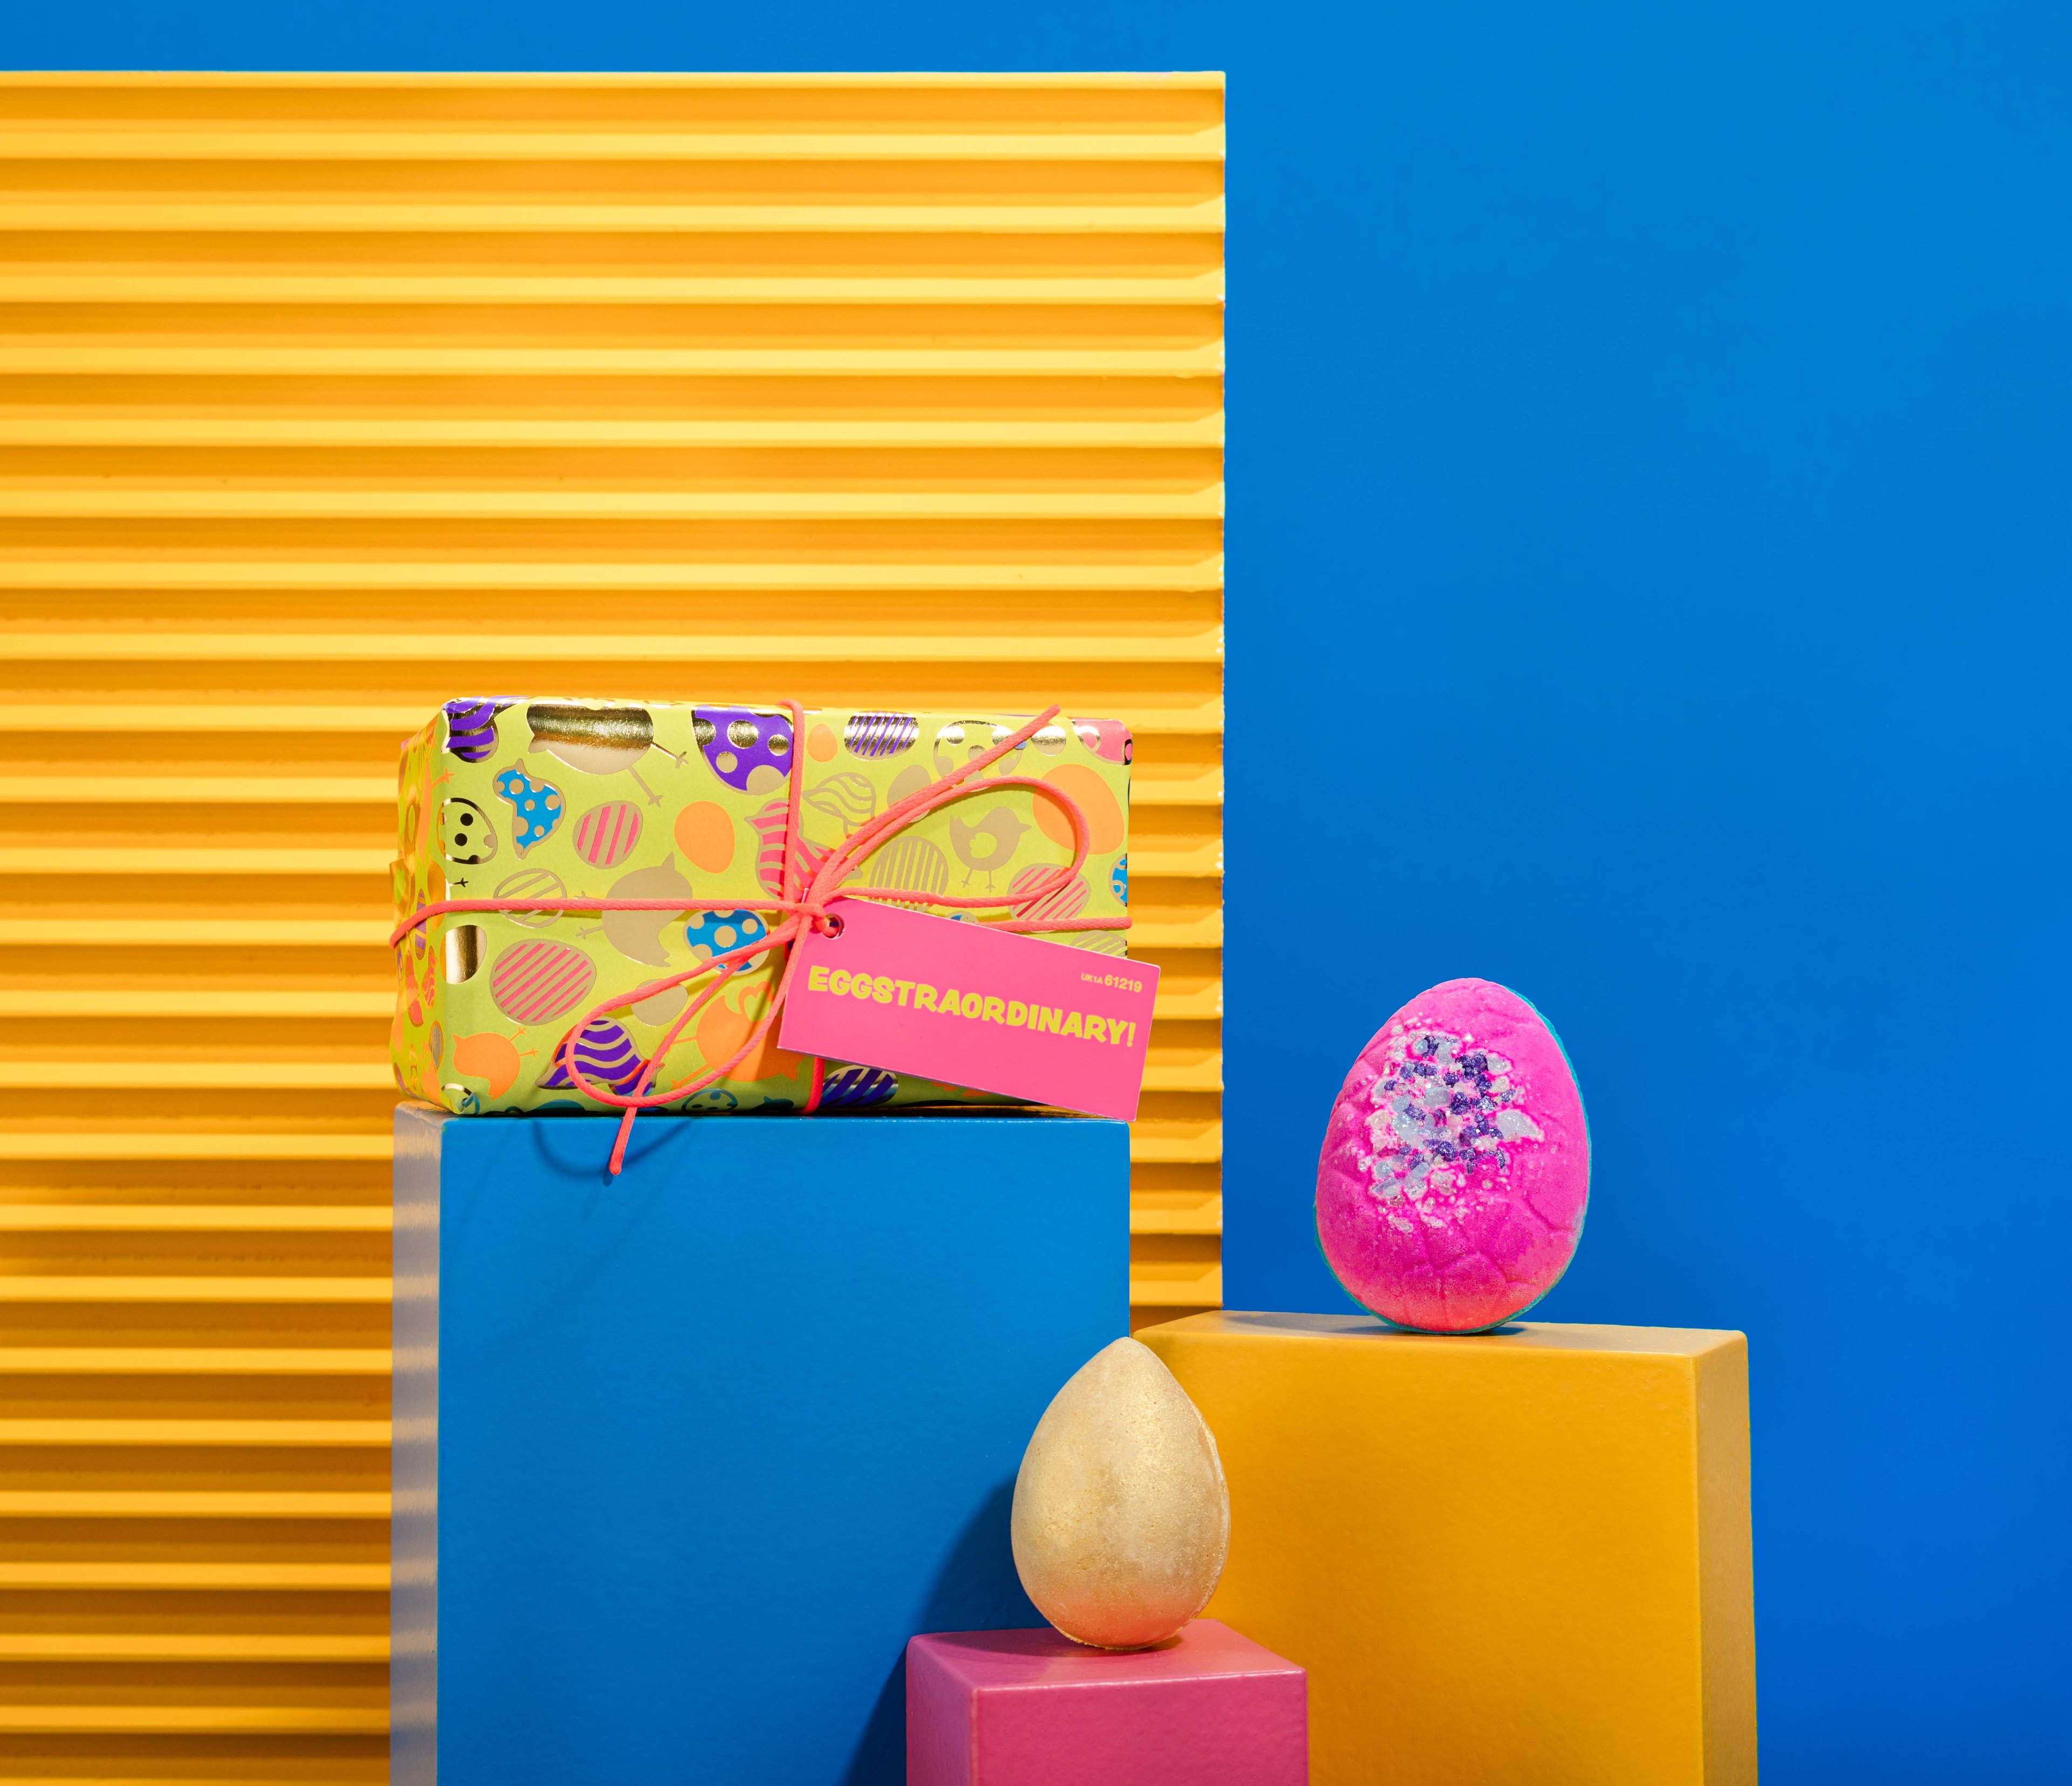 Eggstraordinary!, in front of a blue and yellow background, surrounded by its products on blue and yellow plinths.